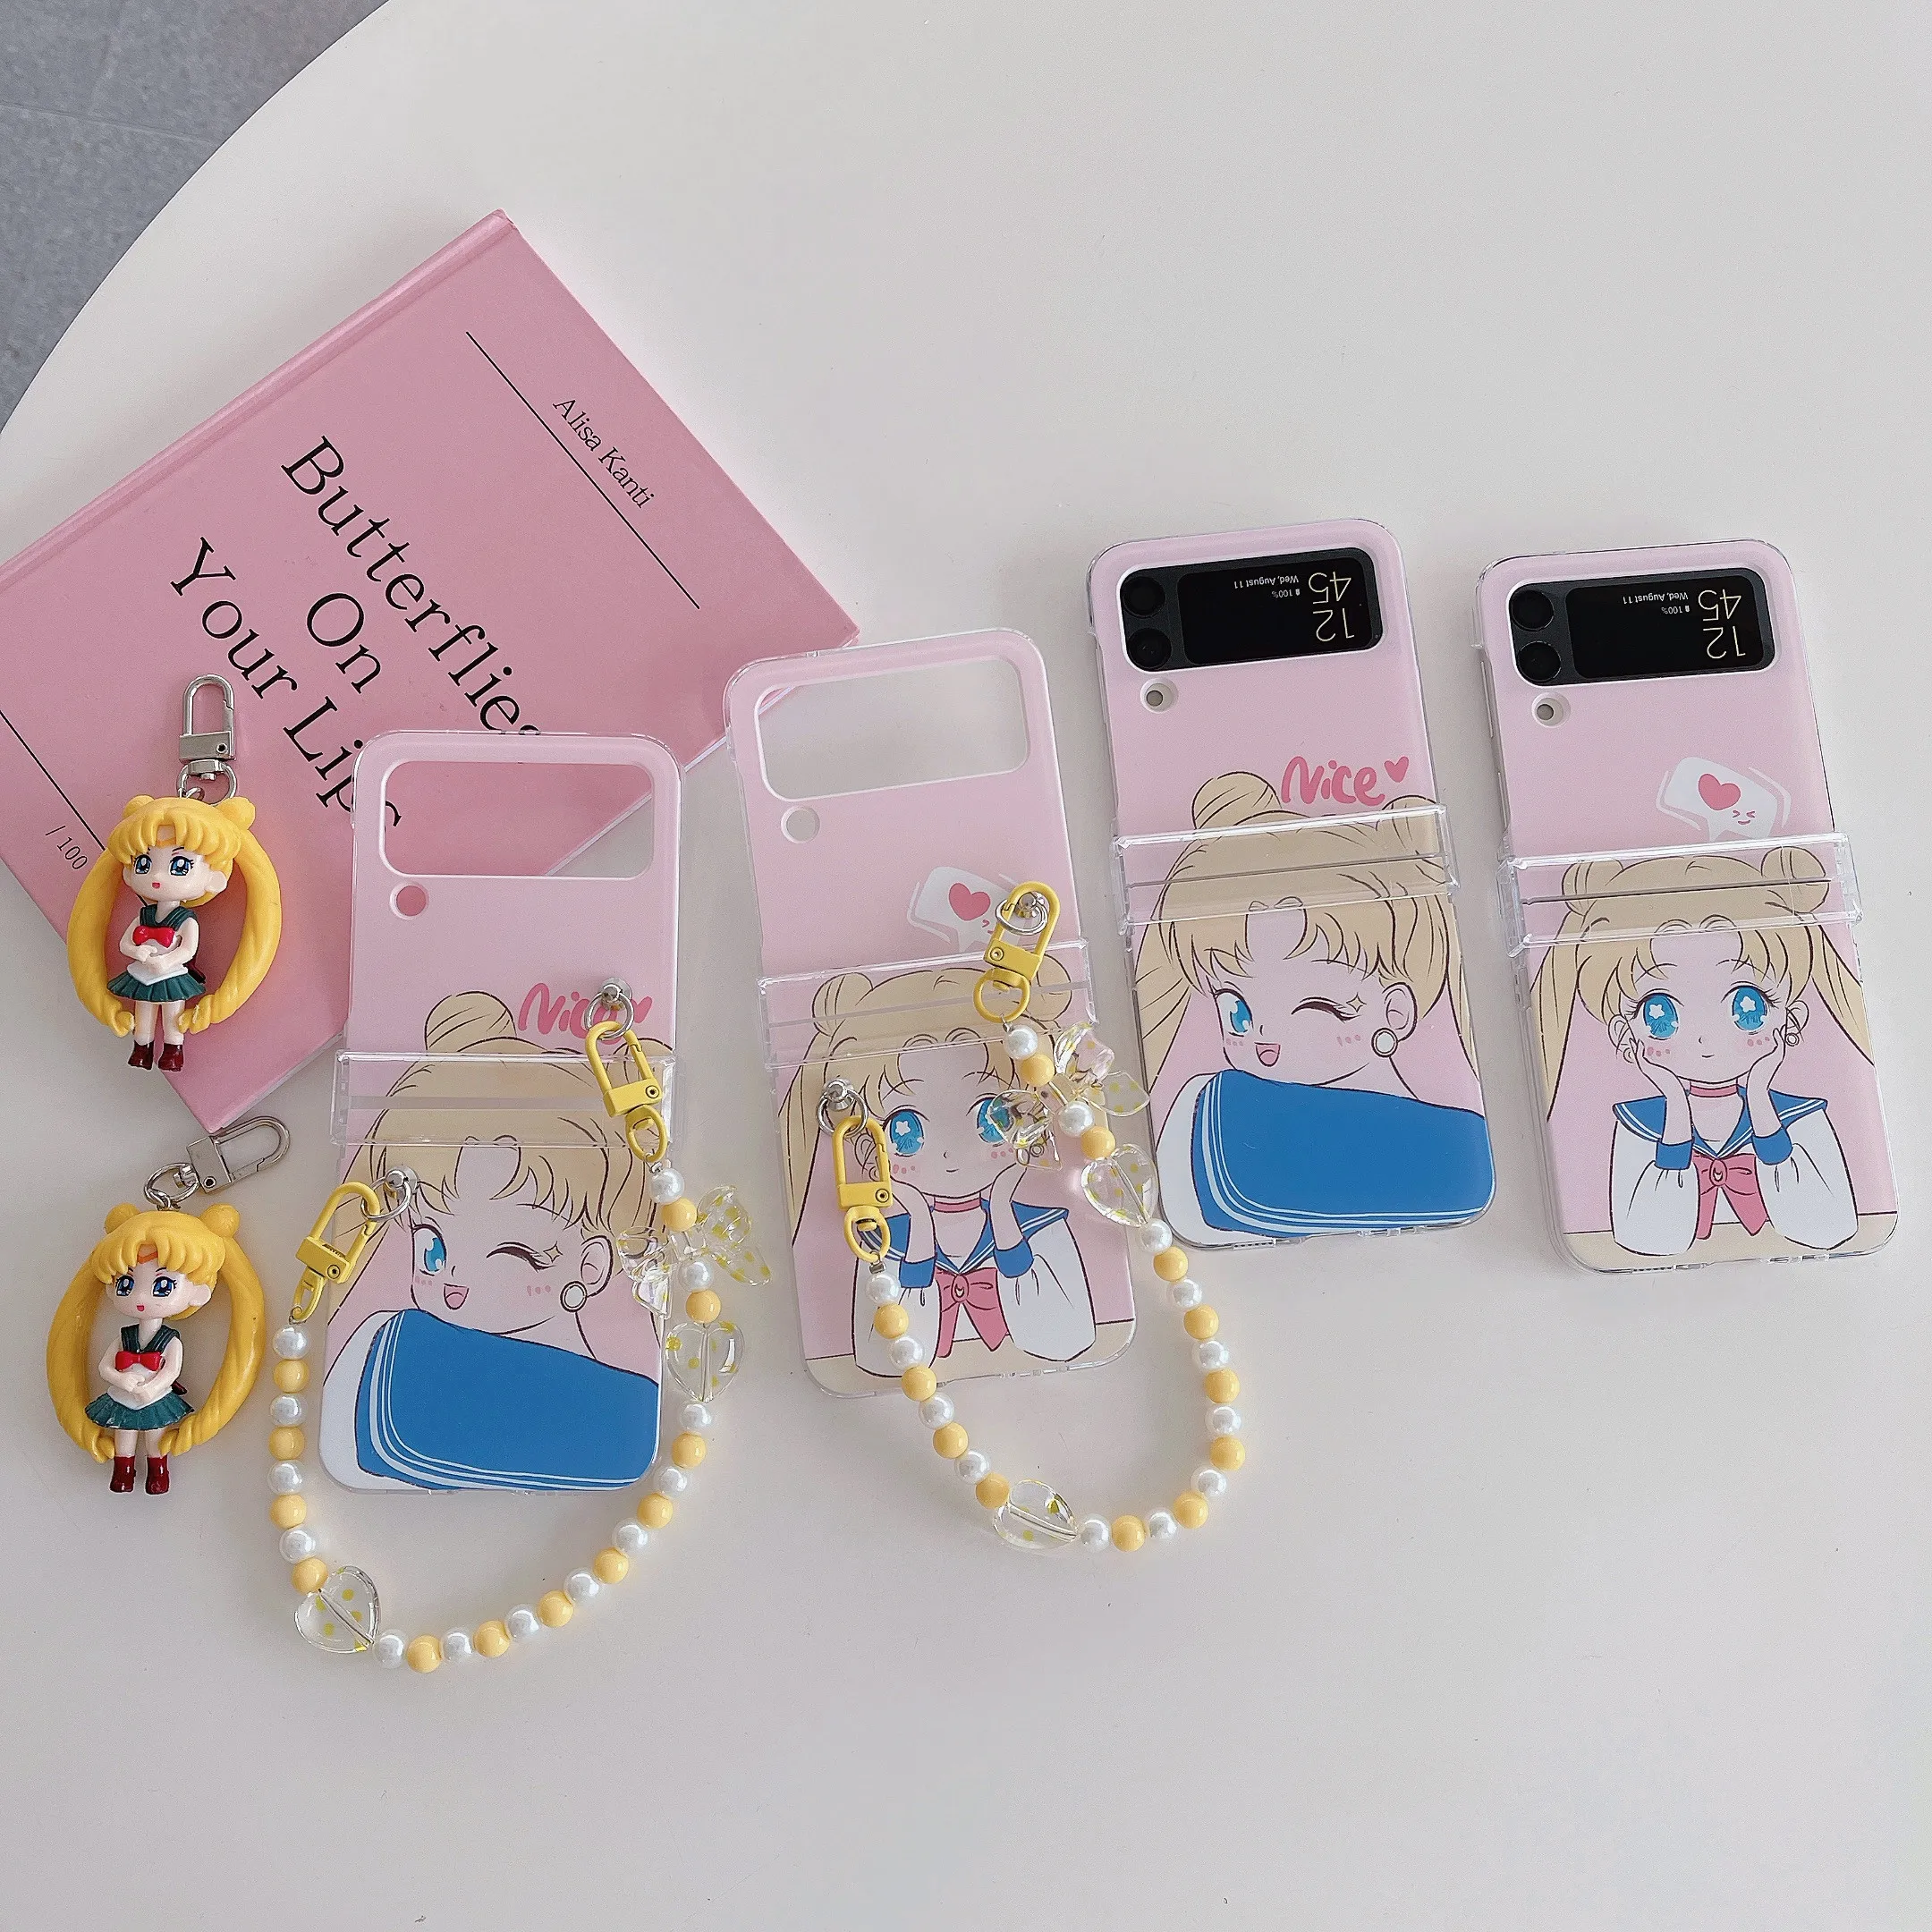 

Sailors Moons With Pendant 3D Doll Hand Chain Phone Case For Samsung Galaxy Z Flip 3 4 5G ZFlip3 ZFlip4 Flip3 Flip4 Cover